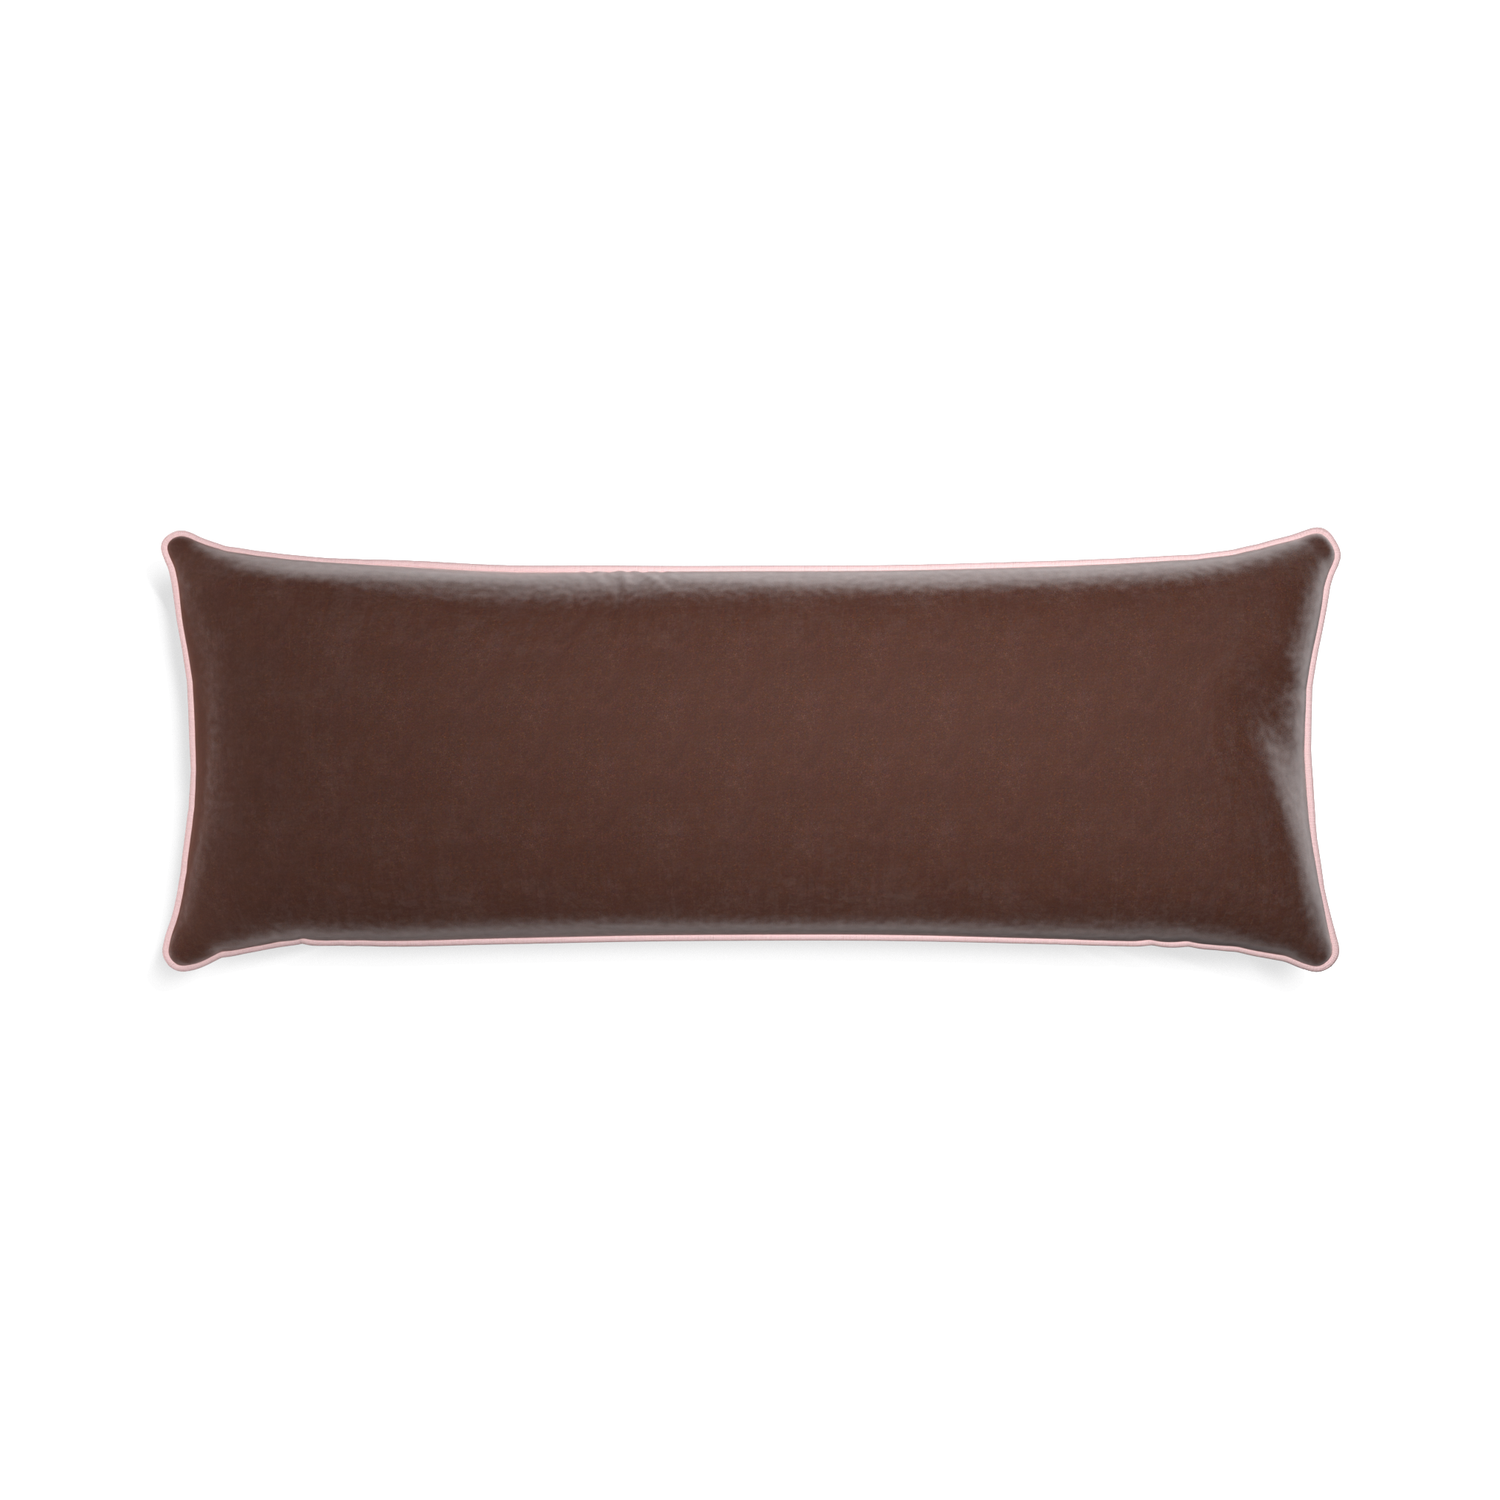 rectangle brown velvet pillow with light pink piping